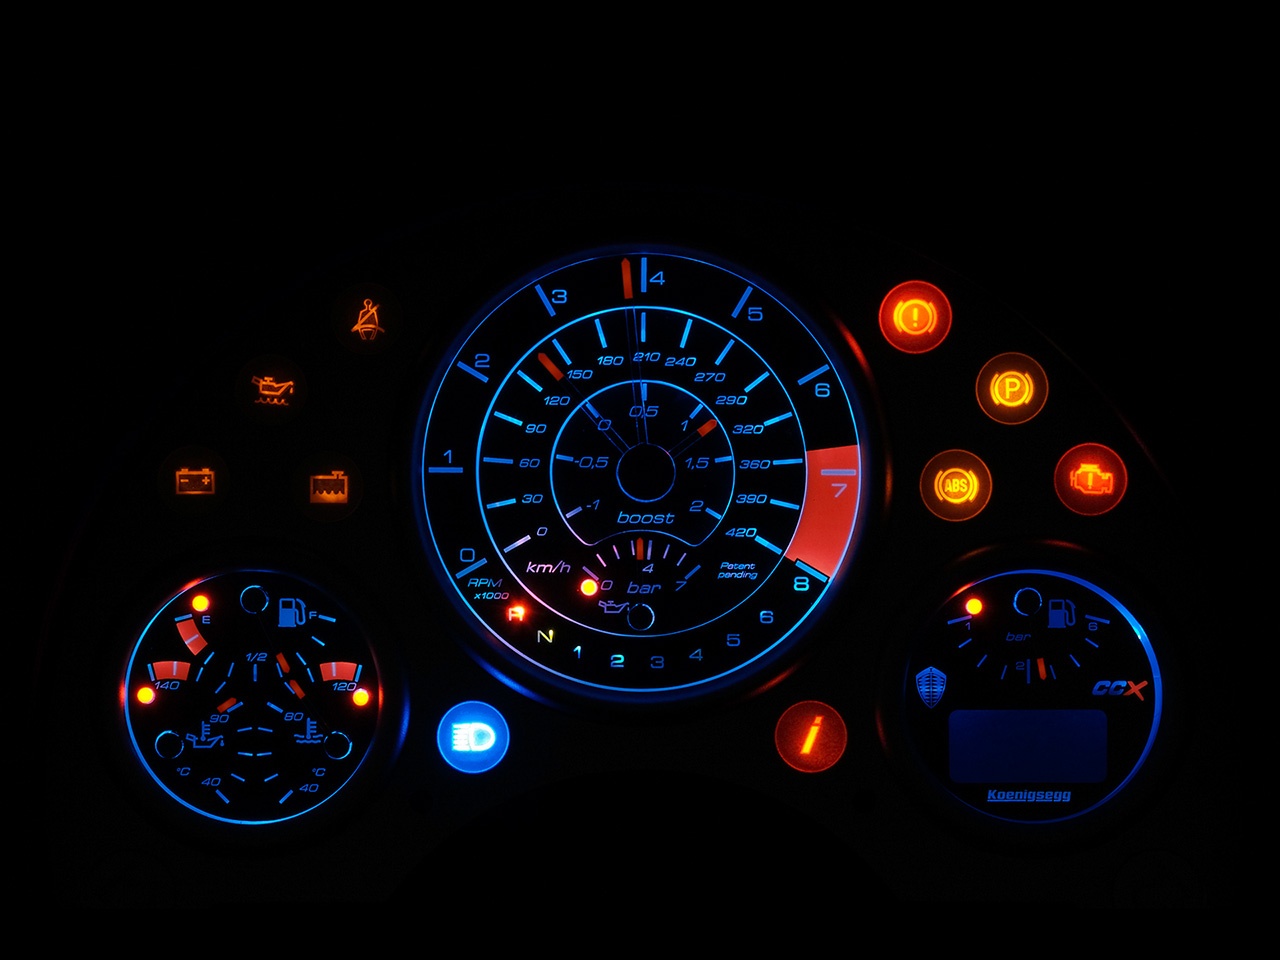 Are my car speedometer readings accurate, what should I do if they are not?